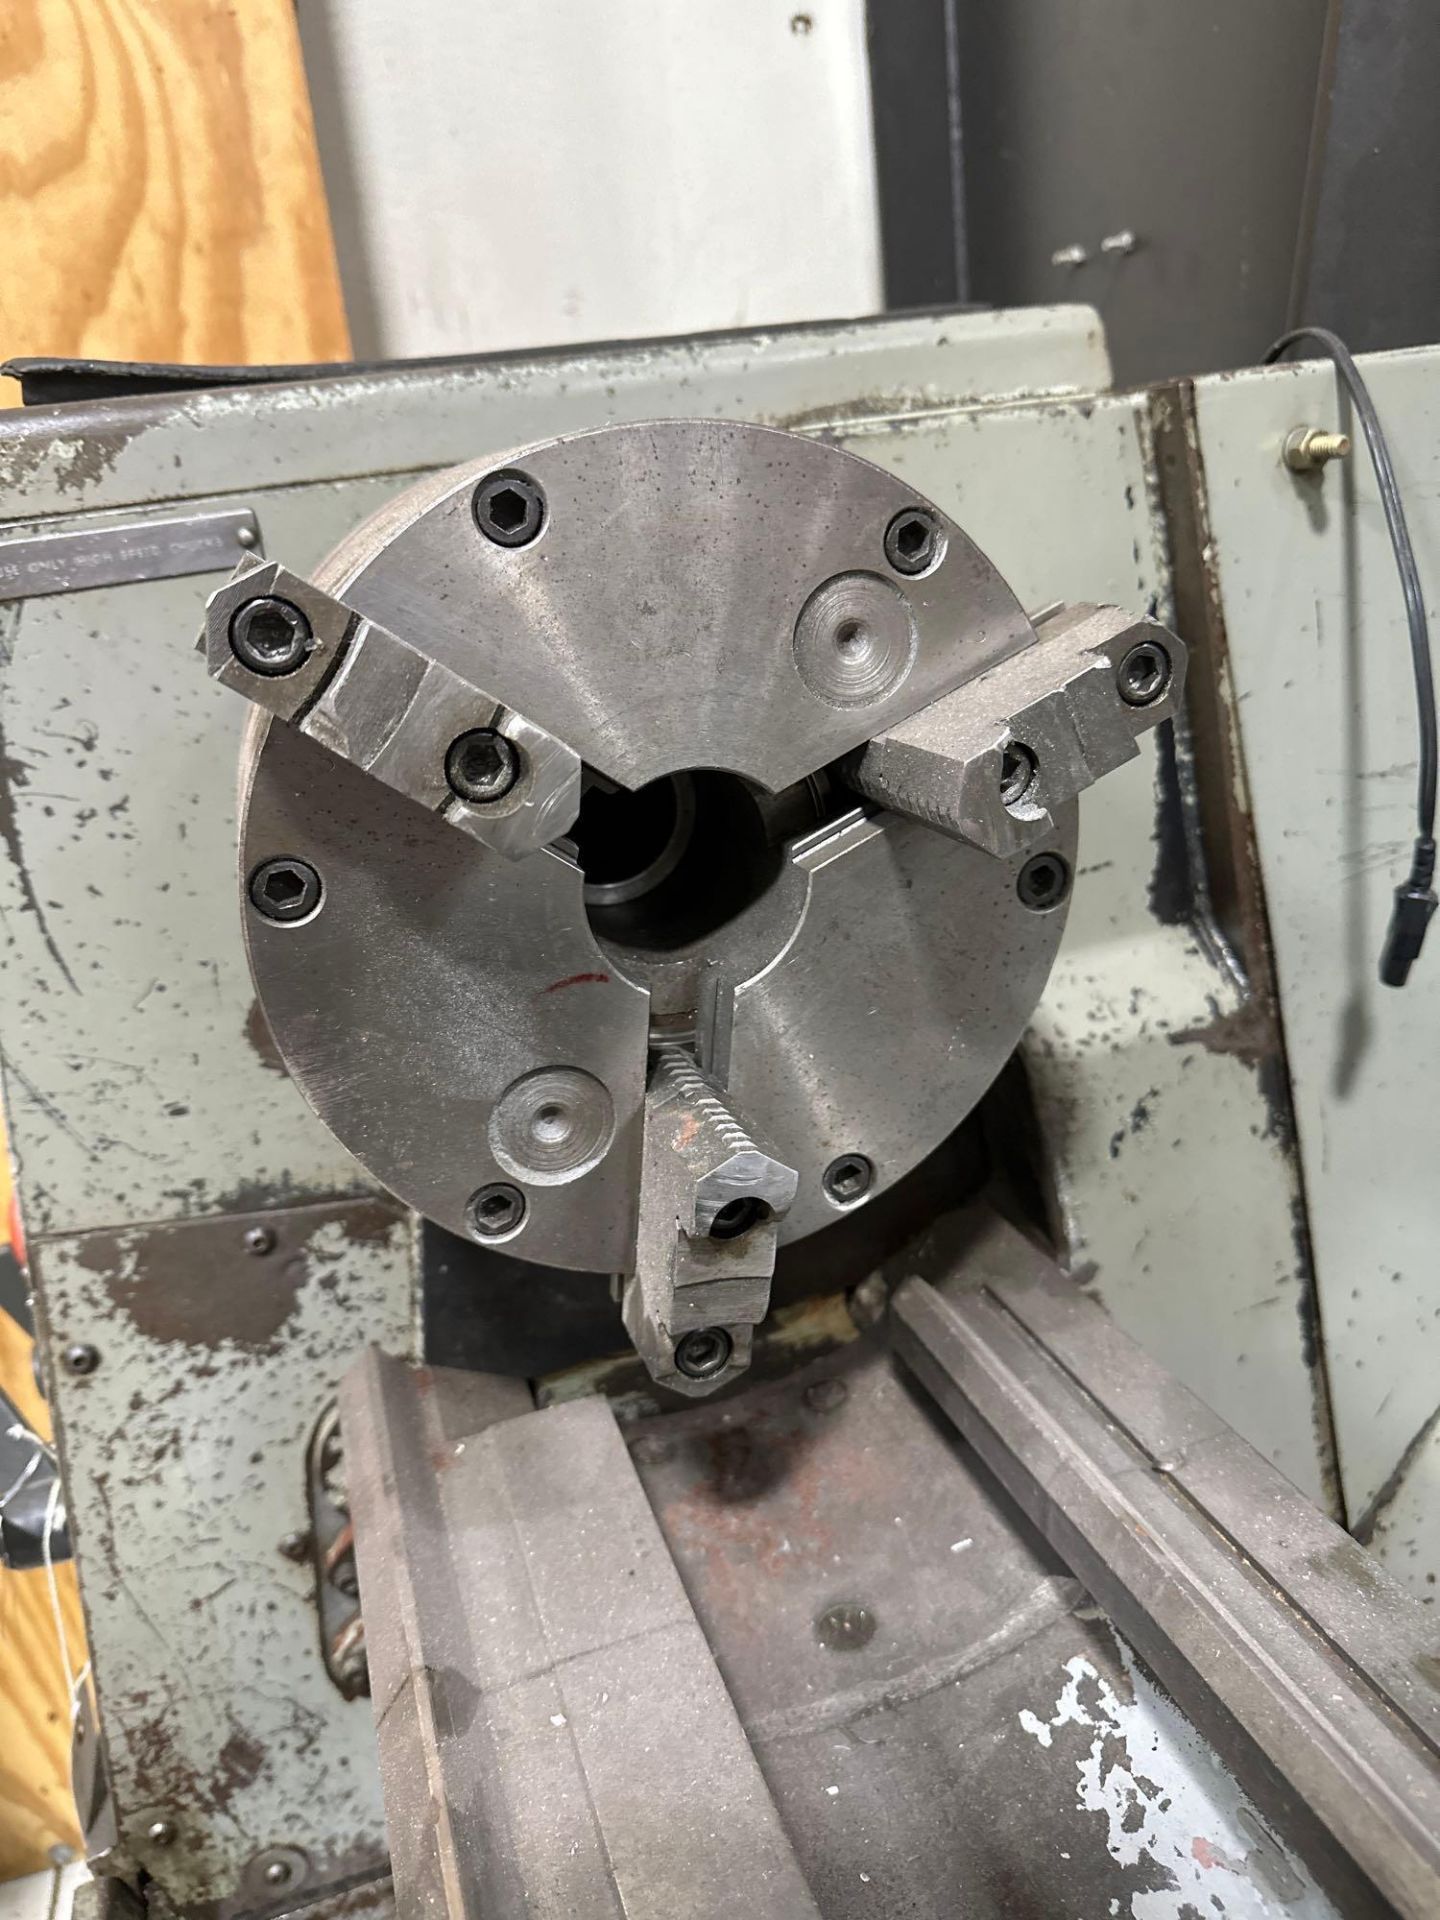 Clausing Cochester Lathe, 8” 3-Jaw Chuck, 2” Spindle Bore, 41” Distance Between Center - Image 4 of 7